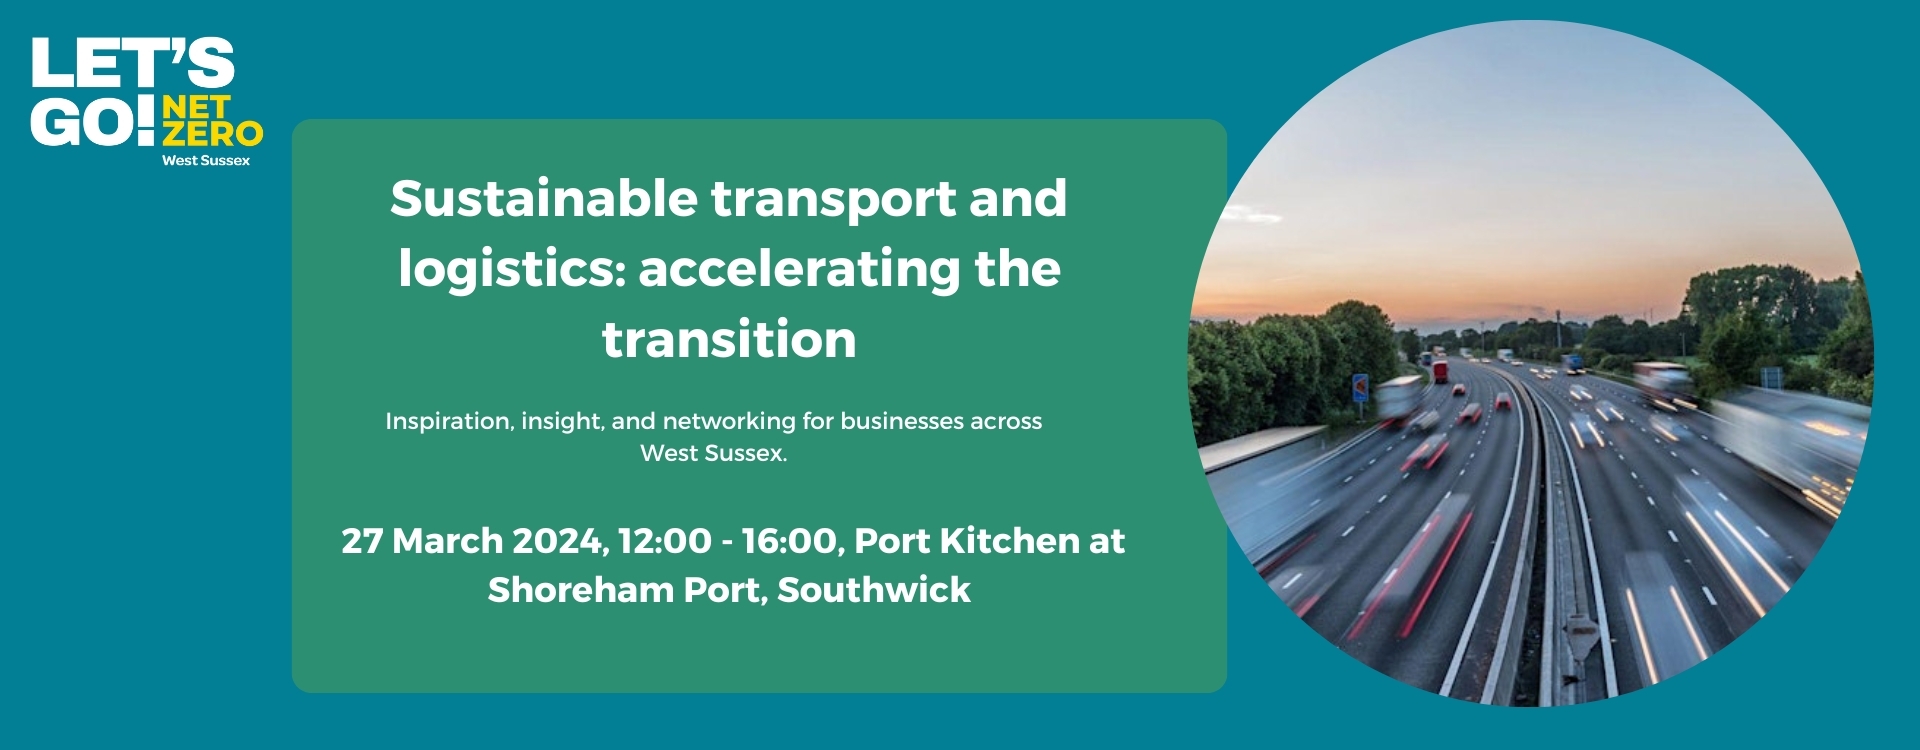 Sustainable transport and logistics: accelerating the transition